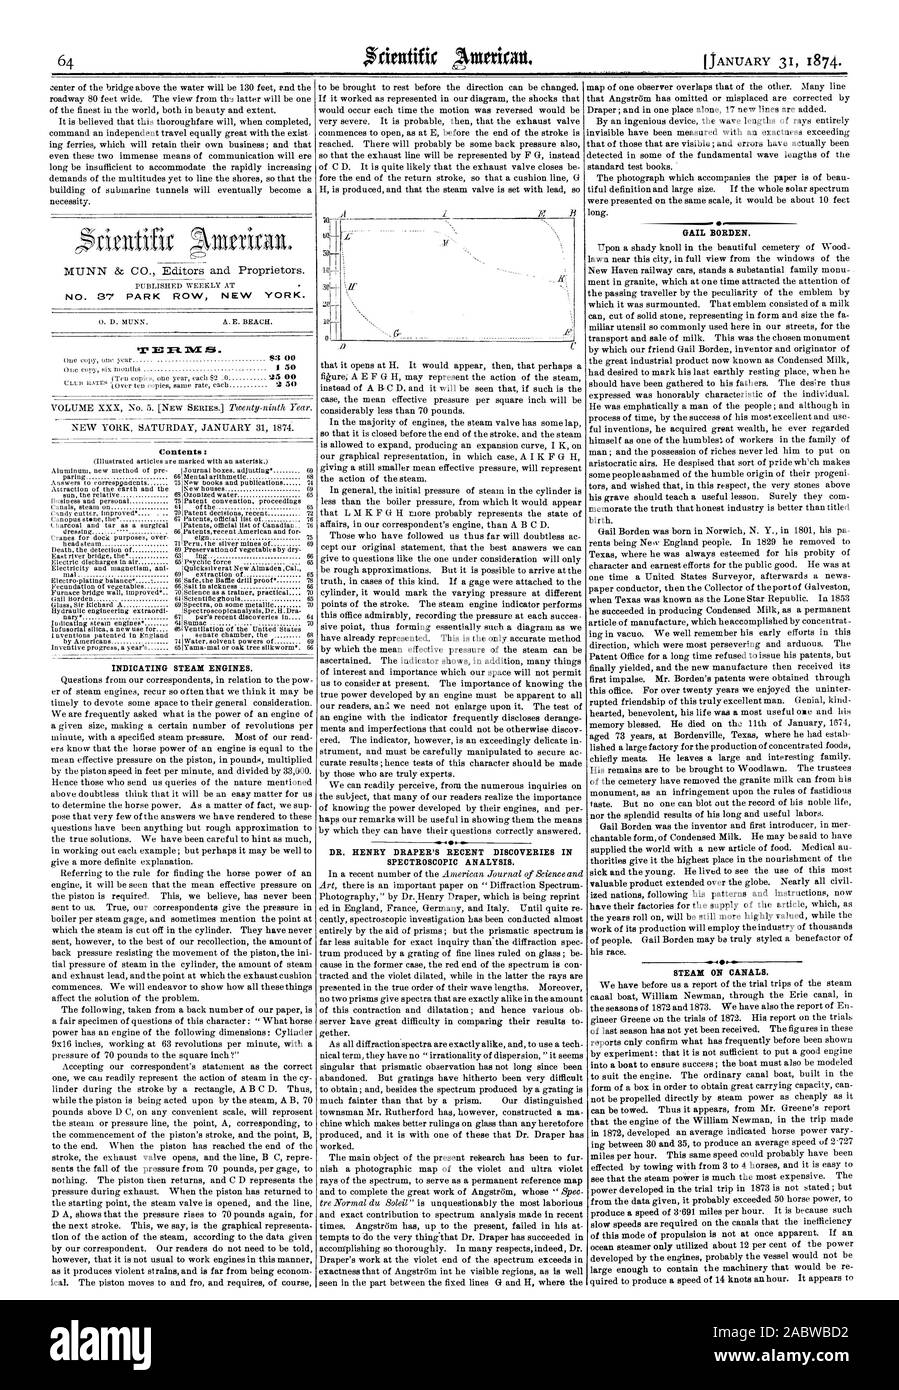 INDICATING STEAM ENGINES. DR. HENRY DRAPER'S RECENT DISCOVERIES IN SPECTROSCOPIC ANALYSIS. GAIL BORDEN. .  STEAM ON CANALS. Contents : NO. 37 PARK ROW NEW YORK. R3 00 1 50 25 00, scientific american, 1874-01-31 Stock Photo